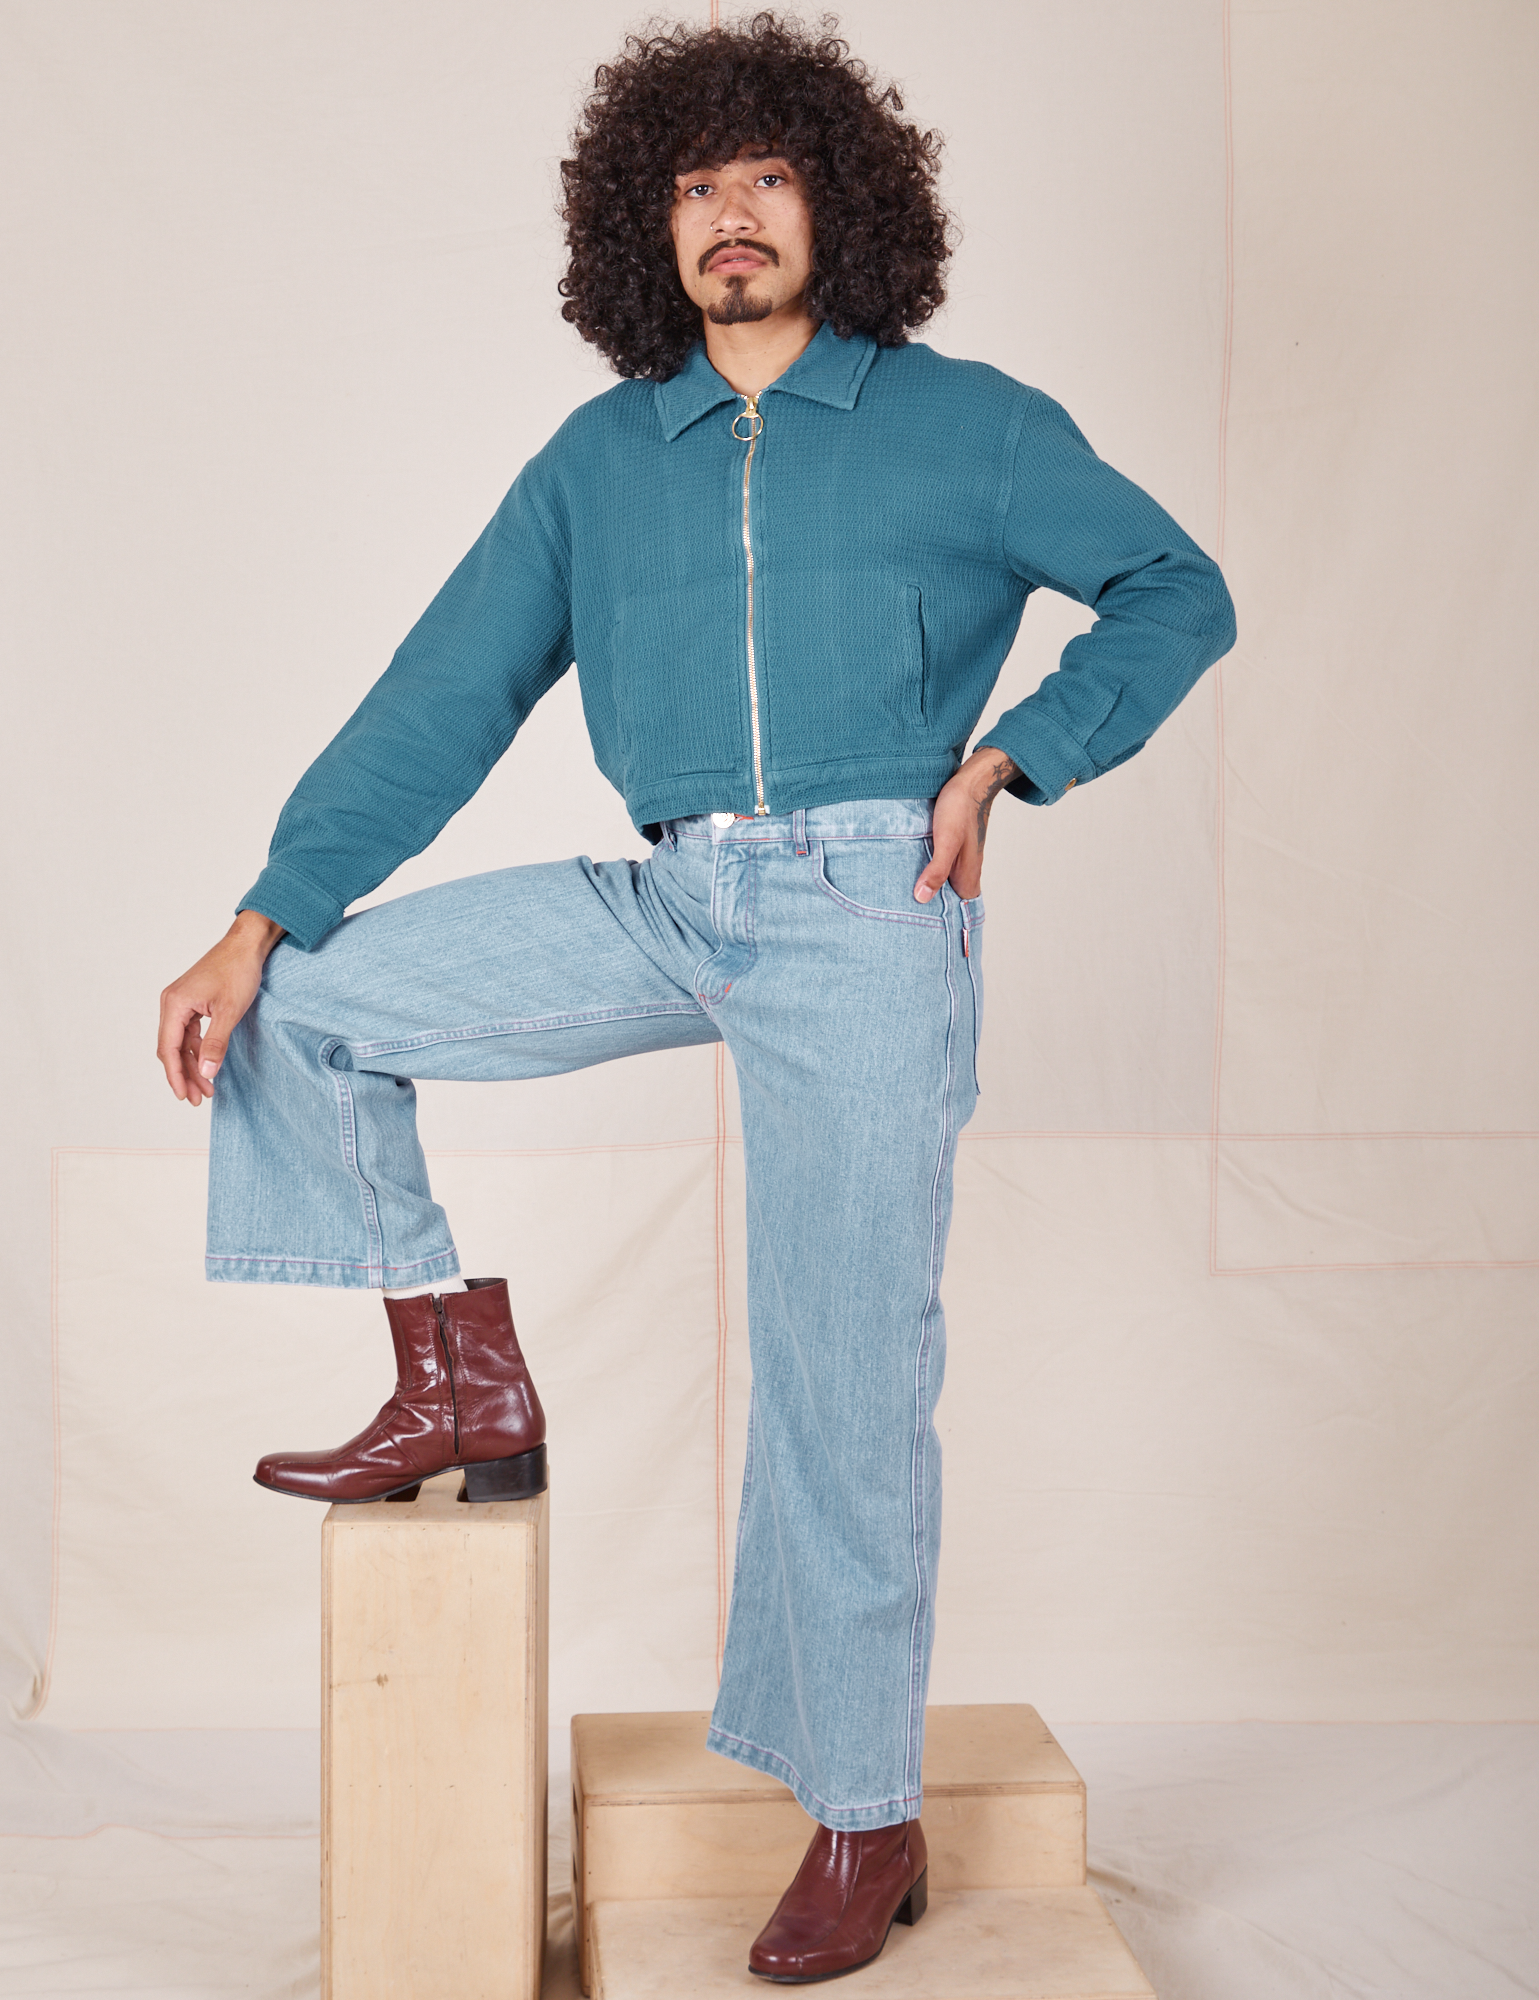 Jesse is standing on wooden crates wearing a zipped up Ricky Jacket in Marine Blue and light wash Frontier Jeans